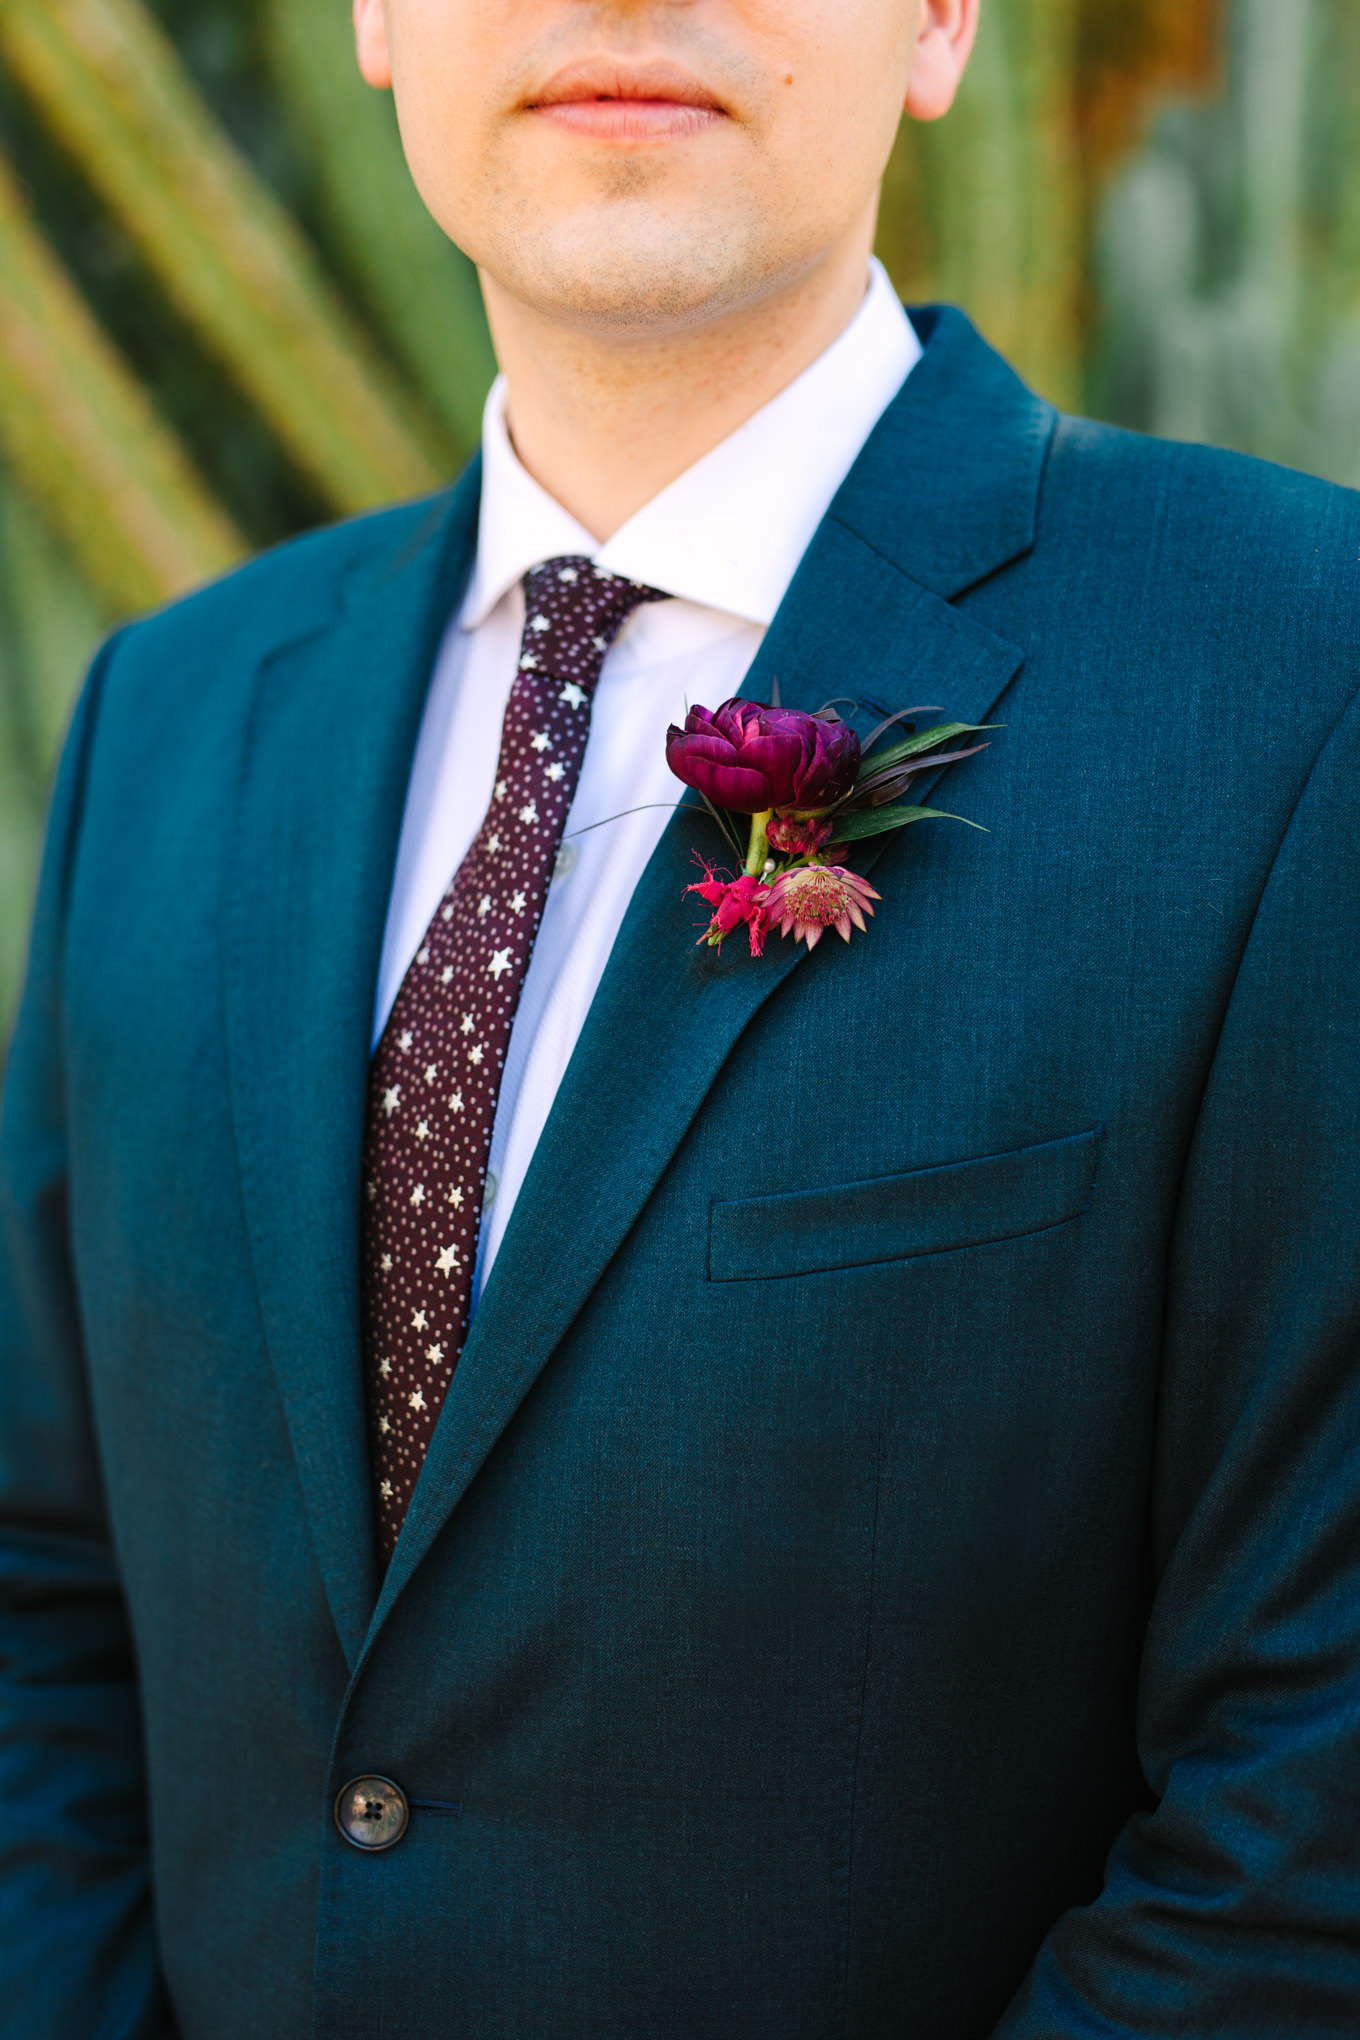 Jewel tone suit with burgundy celestial tie | Colorful jewel tone Palm Springs elopement | Fresh and colorful photography for fun-loving couples in Southern California | #colorfulelopement #palmspringselopement #elopementphotography #palmspringswedding Source: Mary Costa Photography | Los Angeles